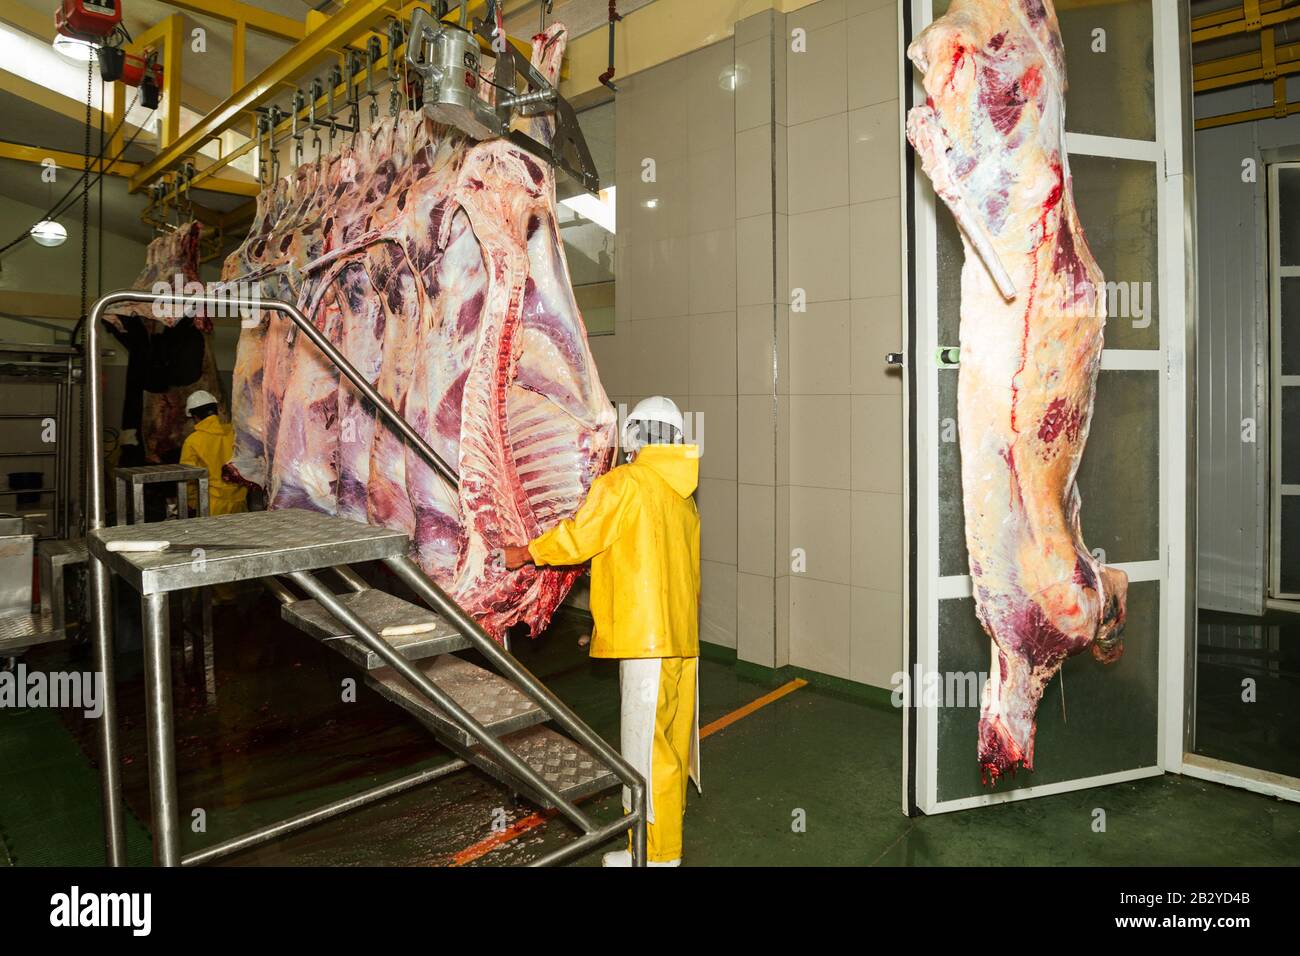 Cattle Production Line In A Slaughterhouse And Refrigeration Room Employees Assisting The Process Stock Photo